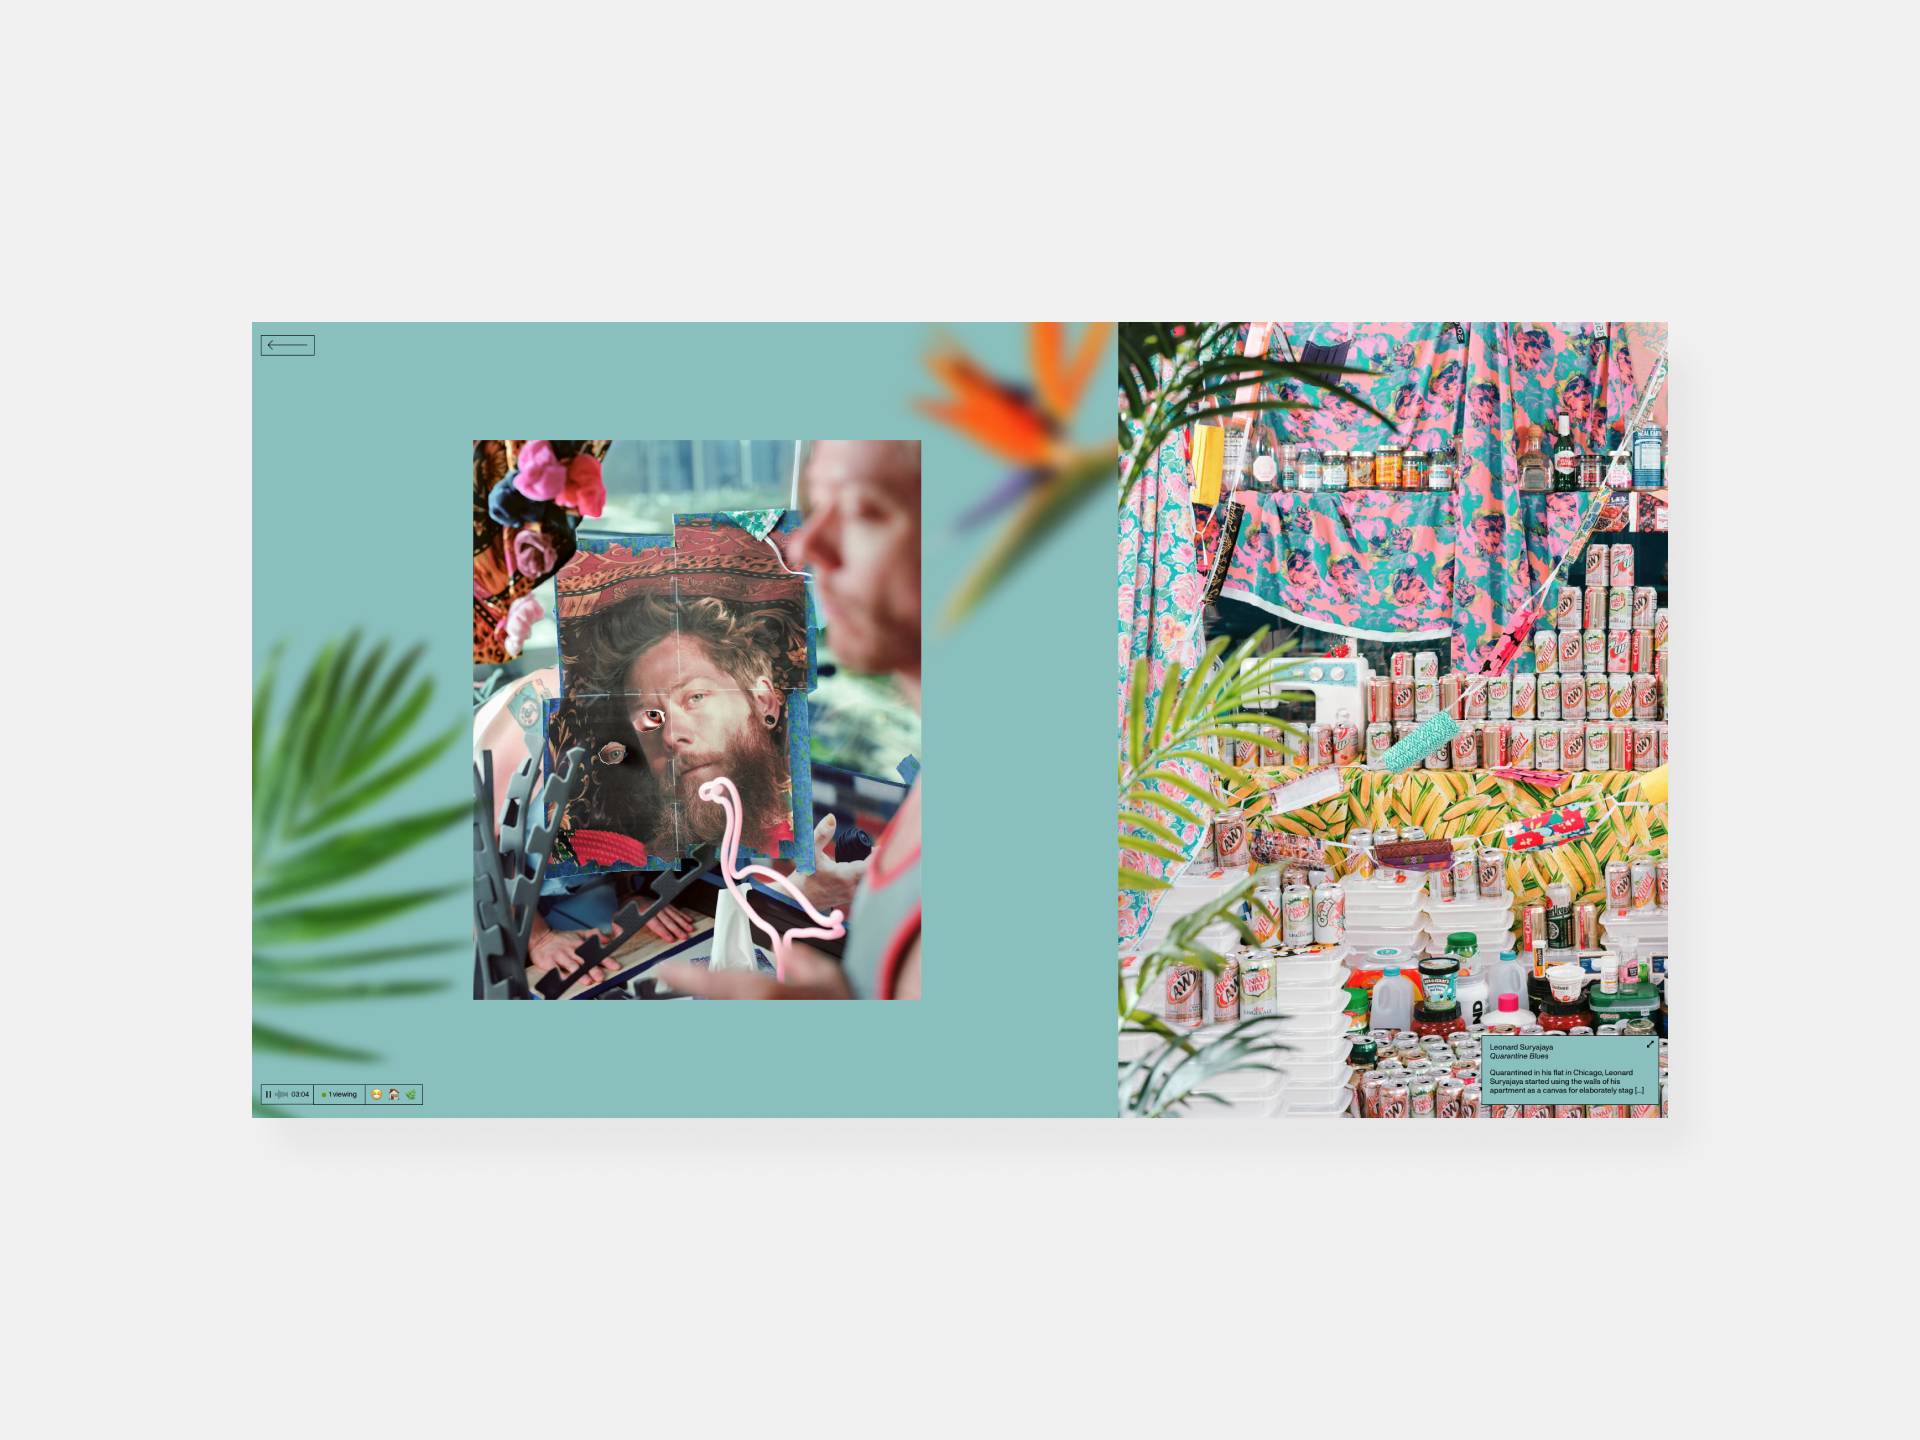 This slide showcases the first part of Leonard artist project page. Two beatiful pictures: the first is a colorful collage where the main subject is a man looking stright into the camera lense. The second image is a colorful image where the main motive are 